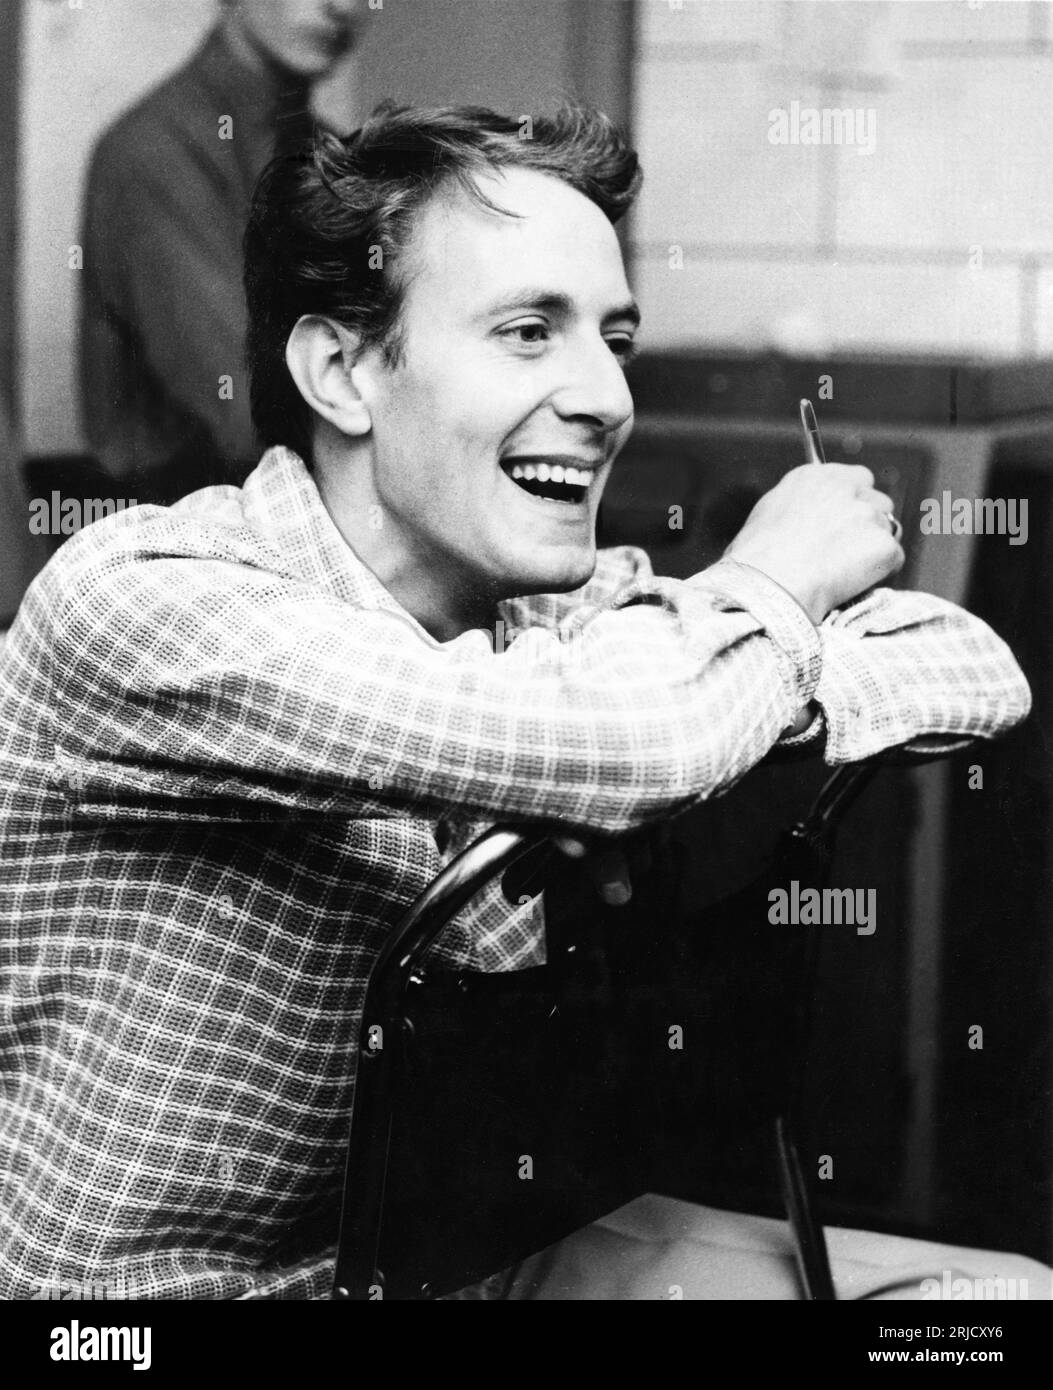 Film Composer JOHN BARRY early 1962 candid in recording studio Stock Photo